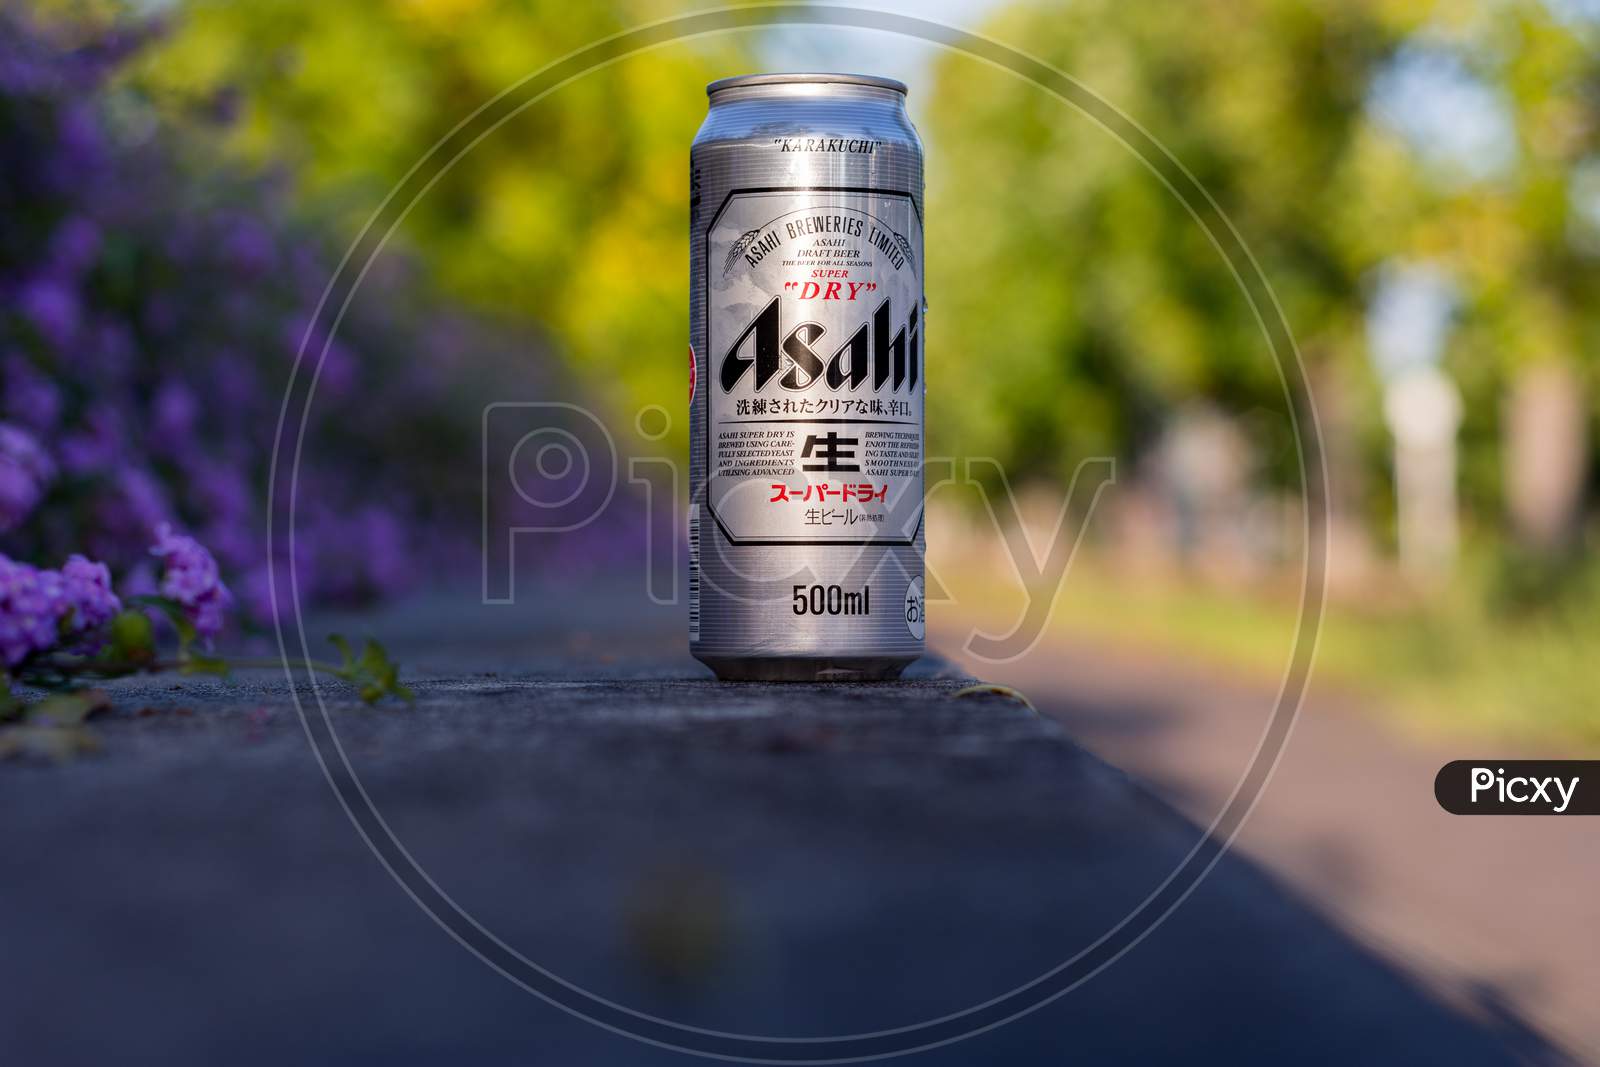 Can Of Popular Japanese Asahi Beer, In A Park